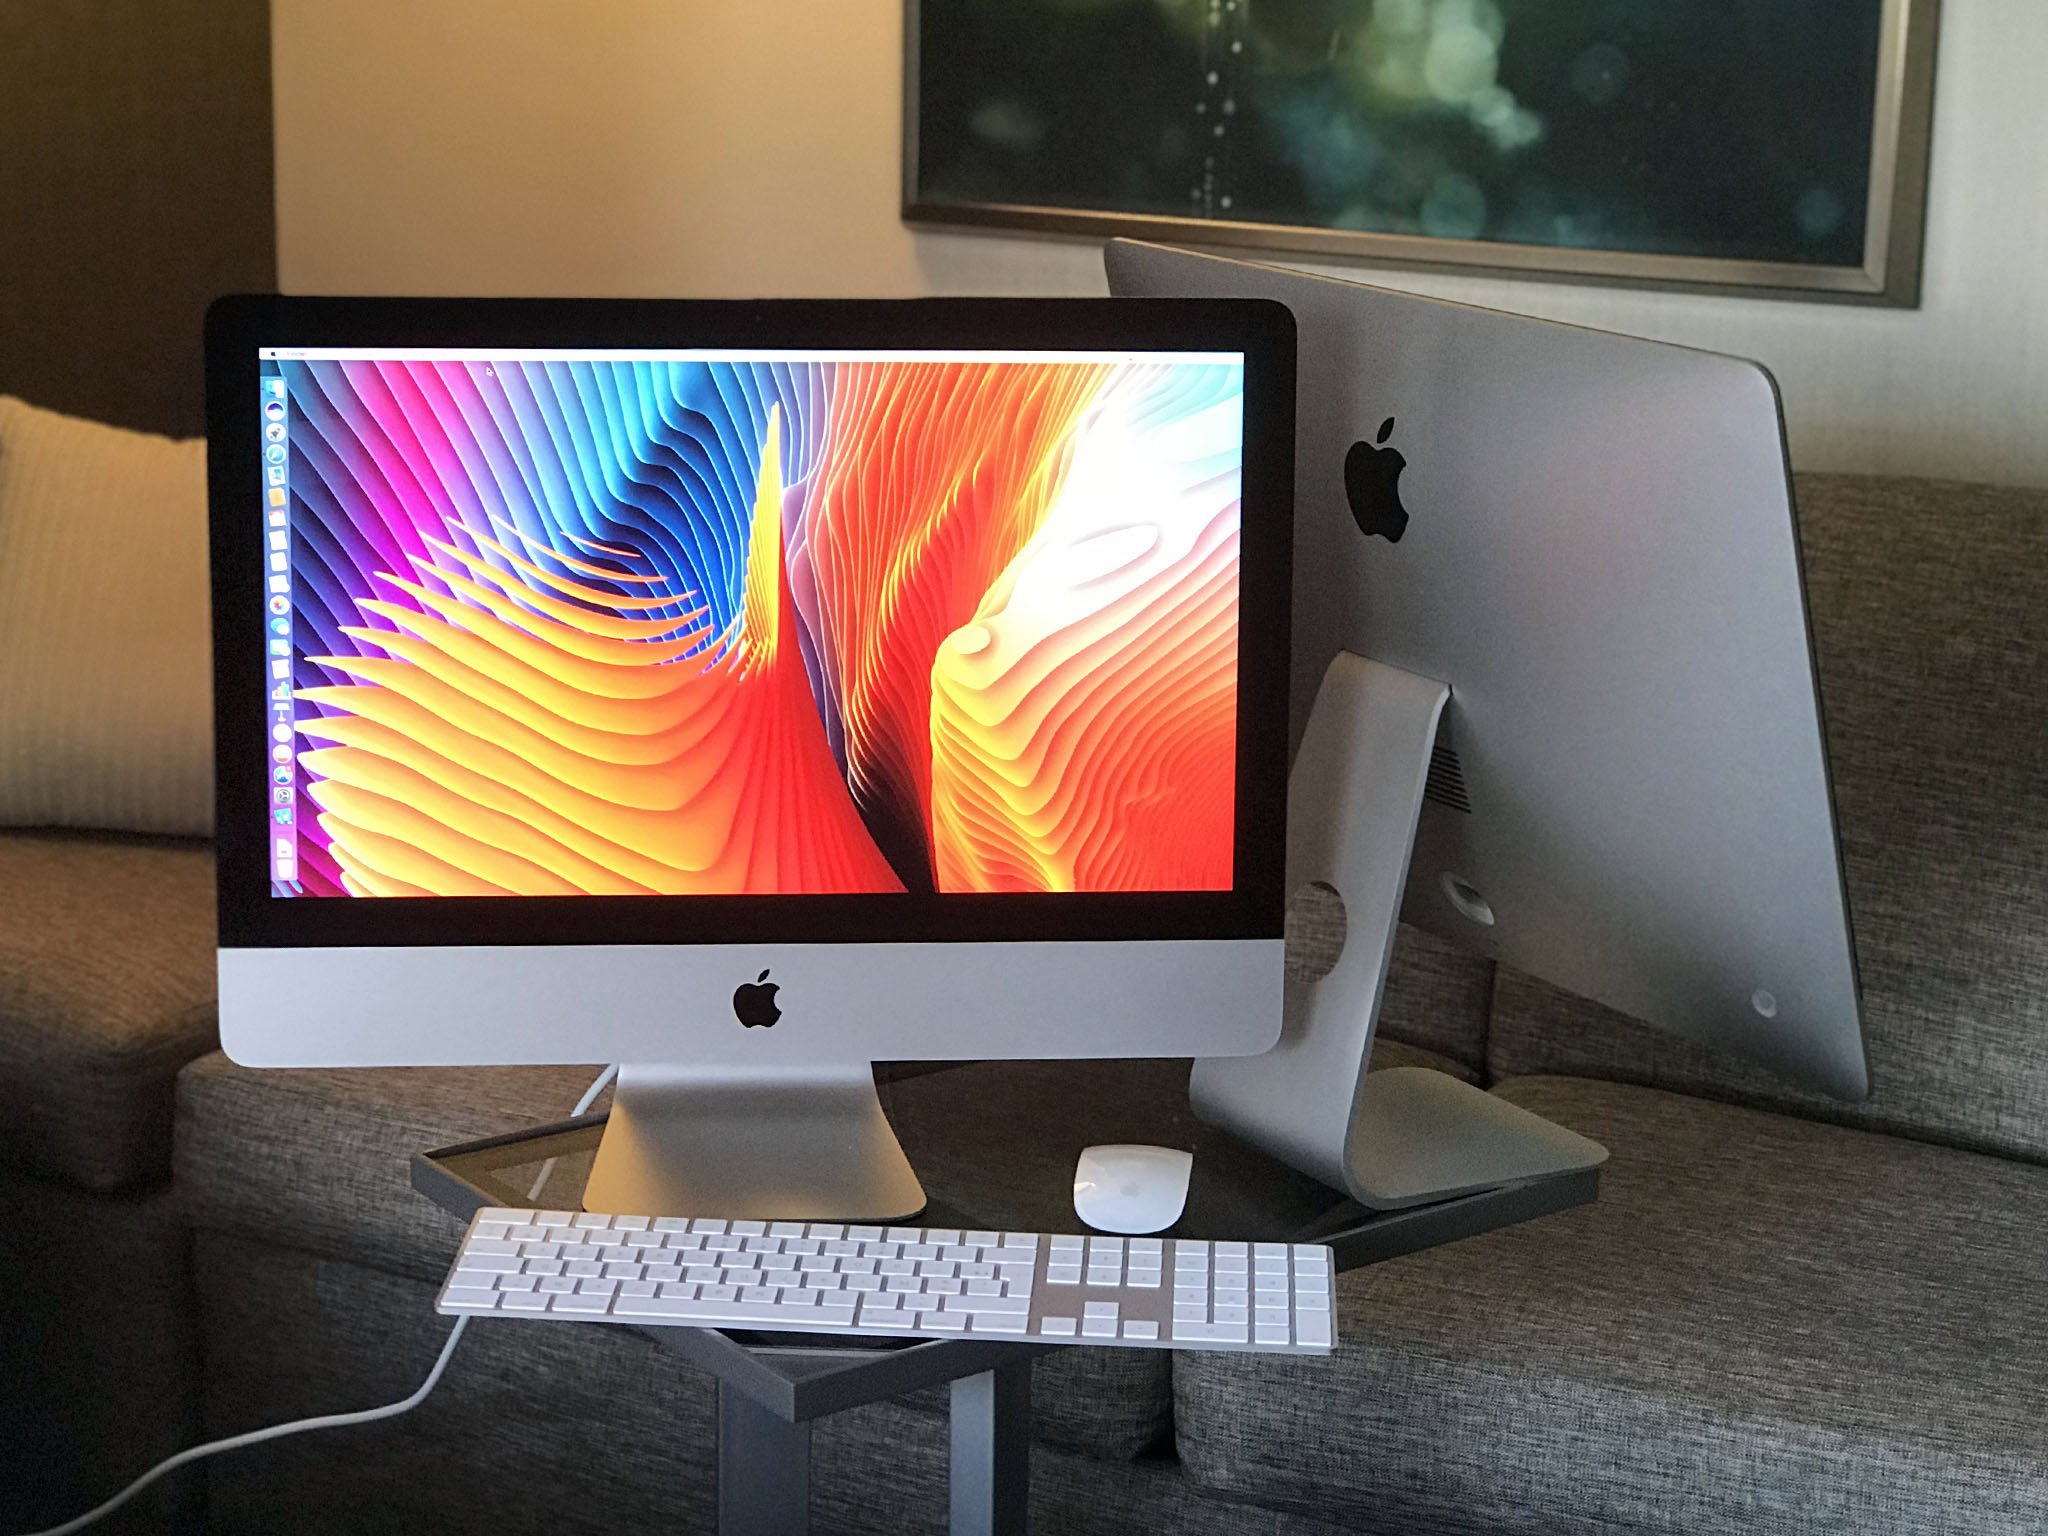 Save 0 on Apple’s iMac with this EPIC one-day deal at Amazon